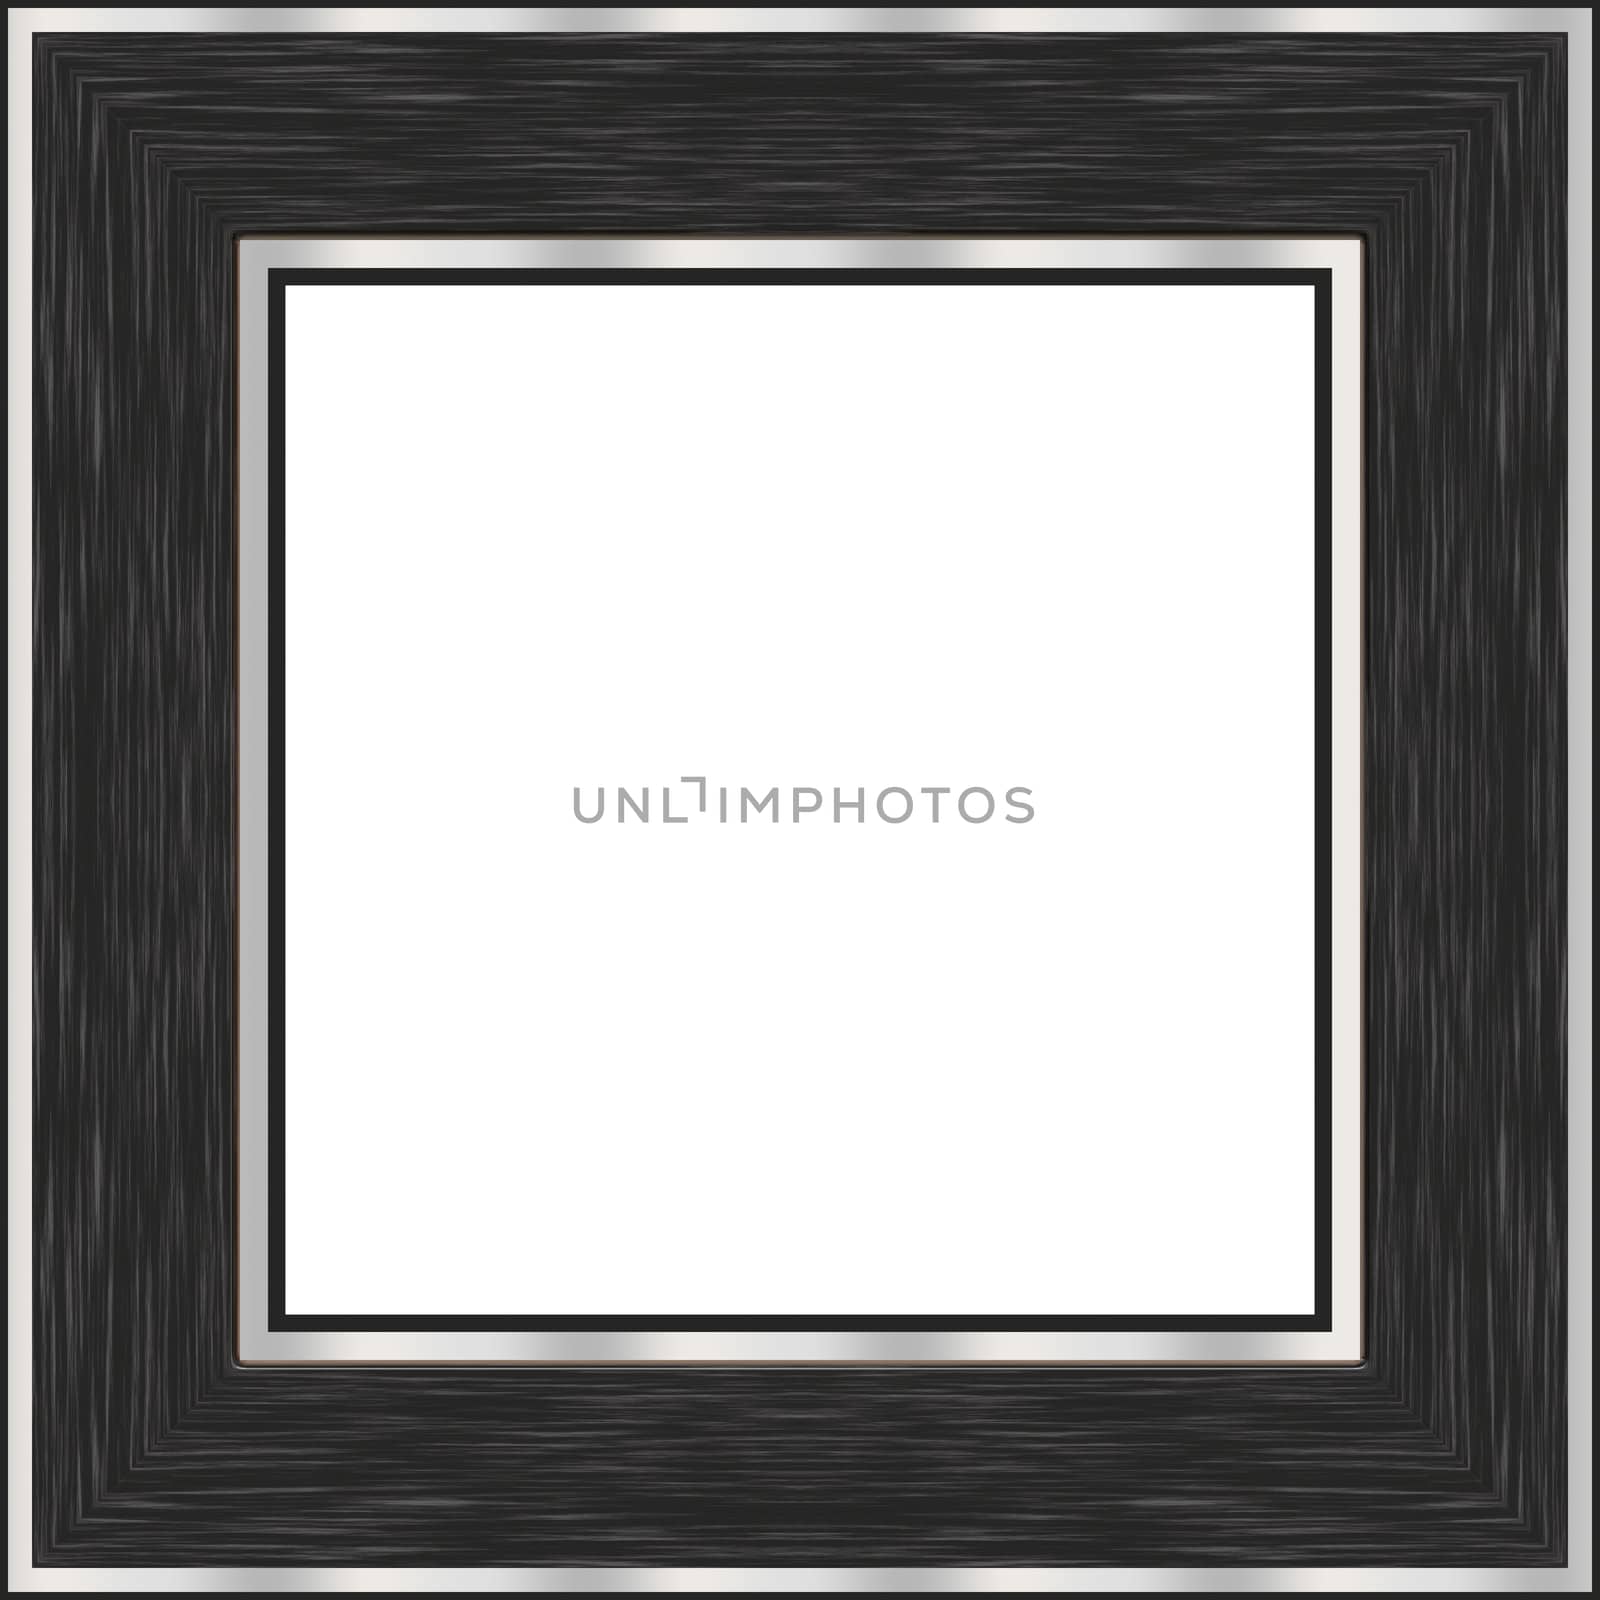 A black wood picture frame with brushed nickel accents.  Contains clipping path for the white area in the center.